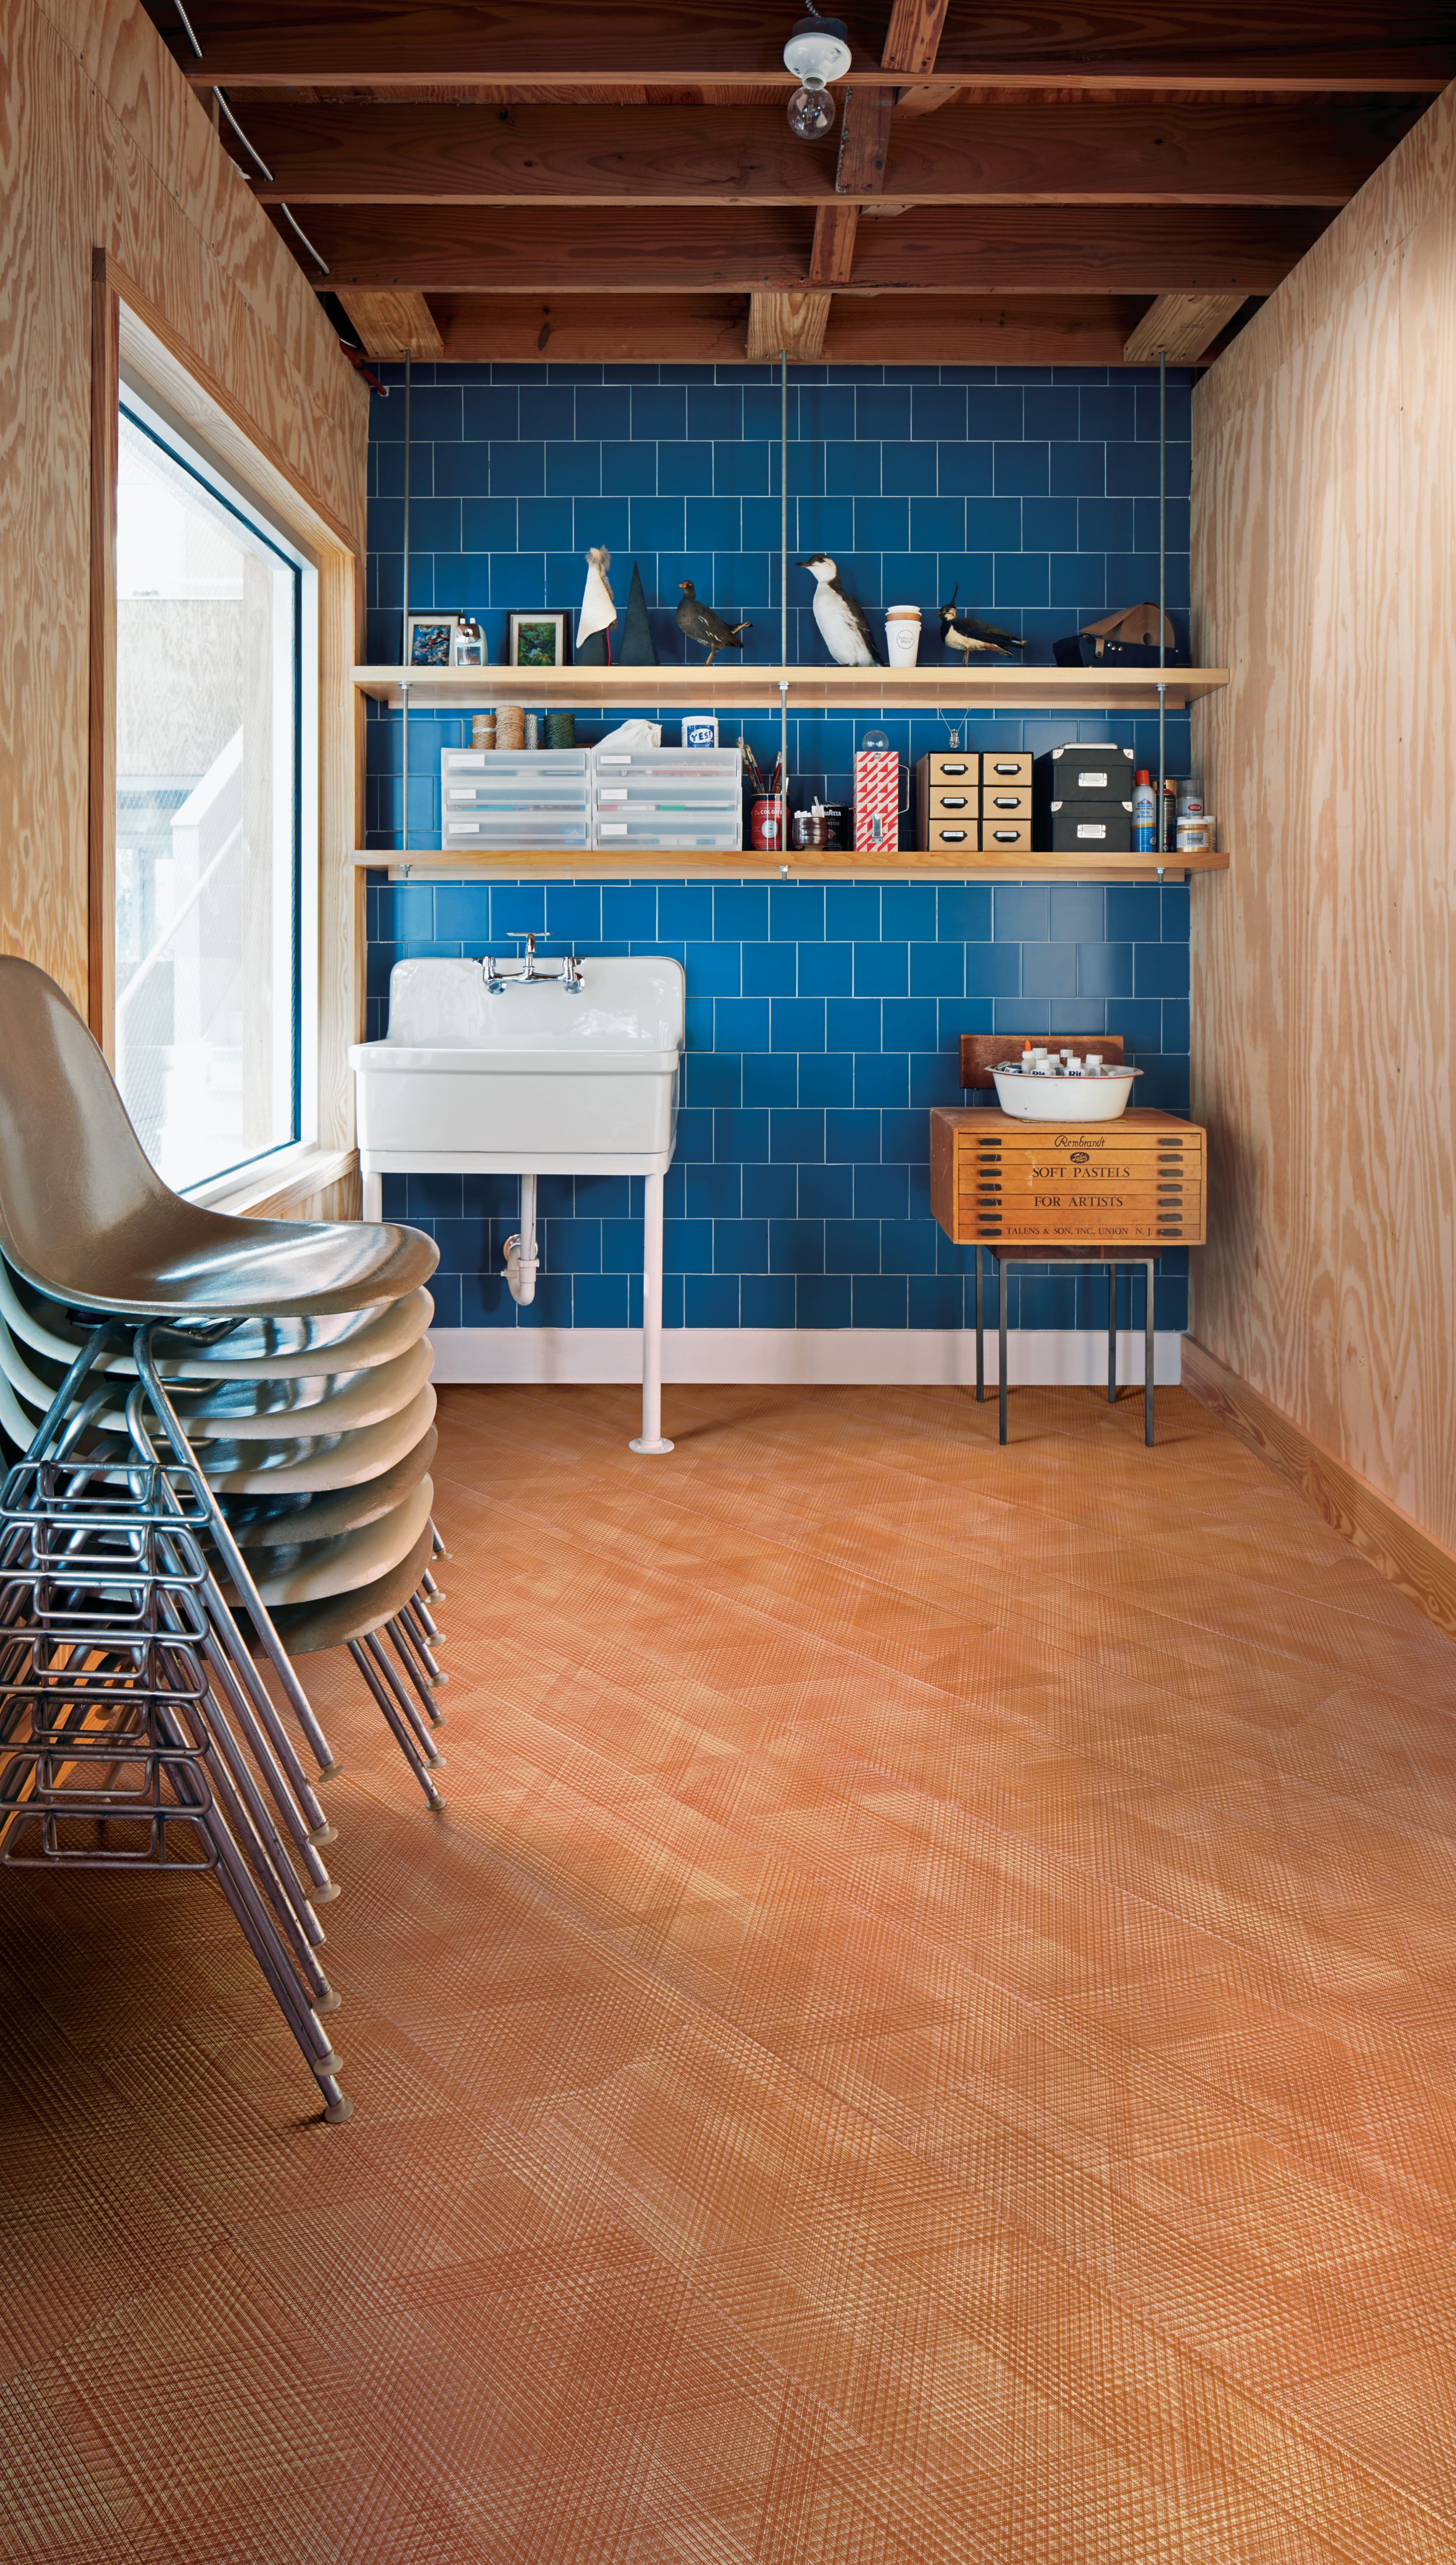 image Interface Drawn Lines LVT in storage area with shelving and sink numéro 10